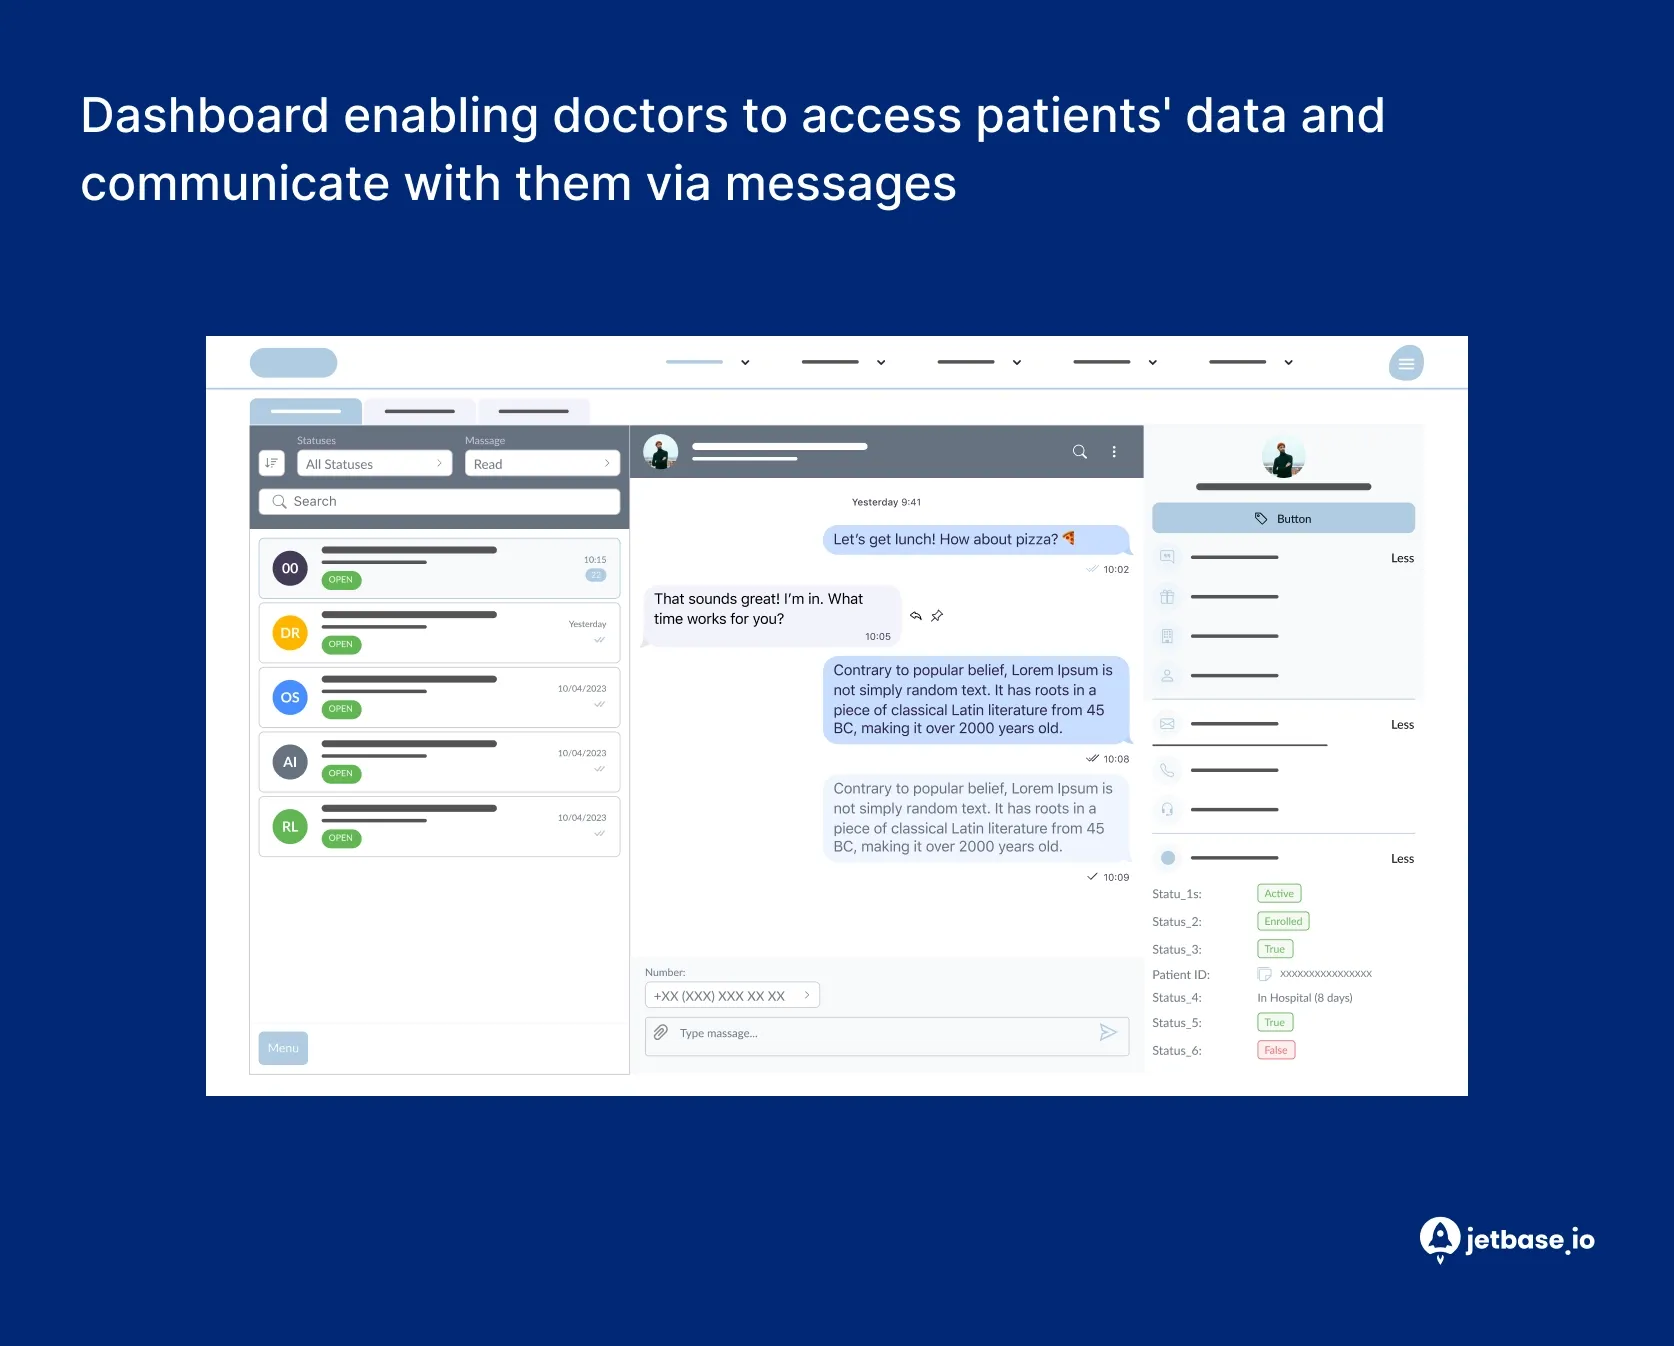 A dashboard enabling doctors to access patient data.webp